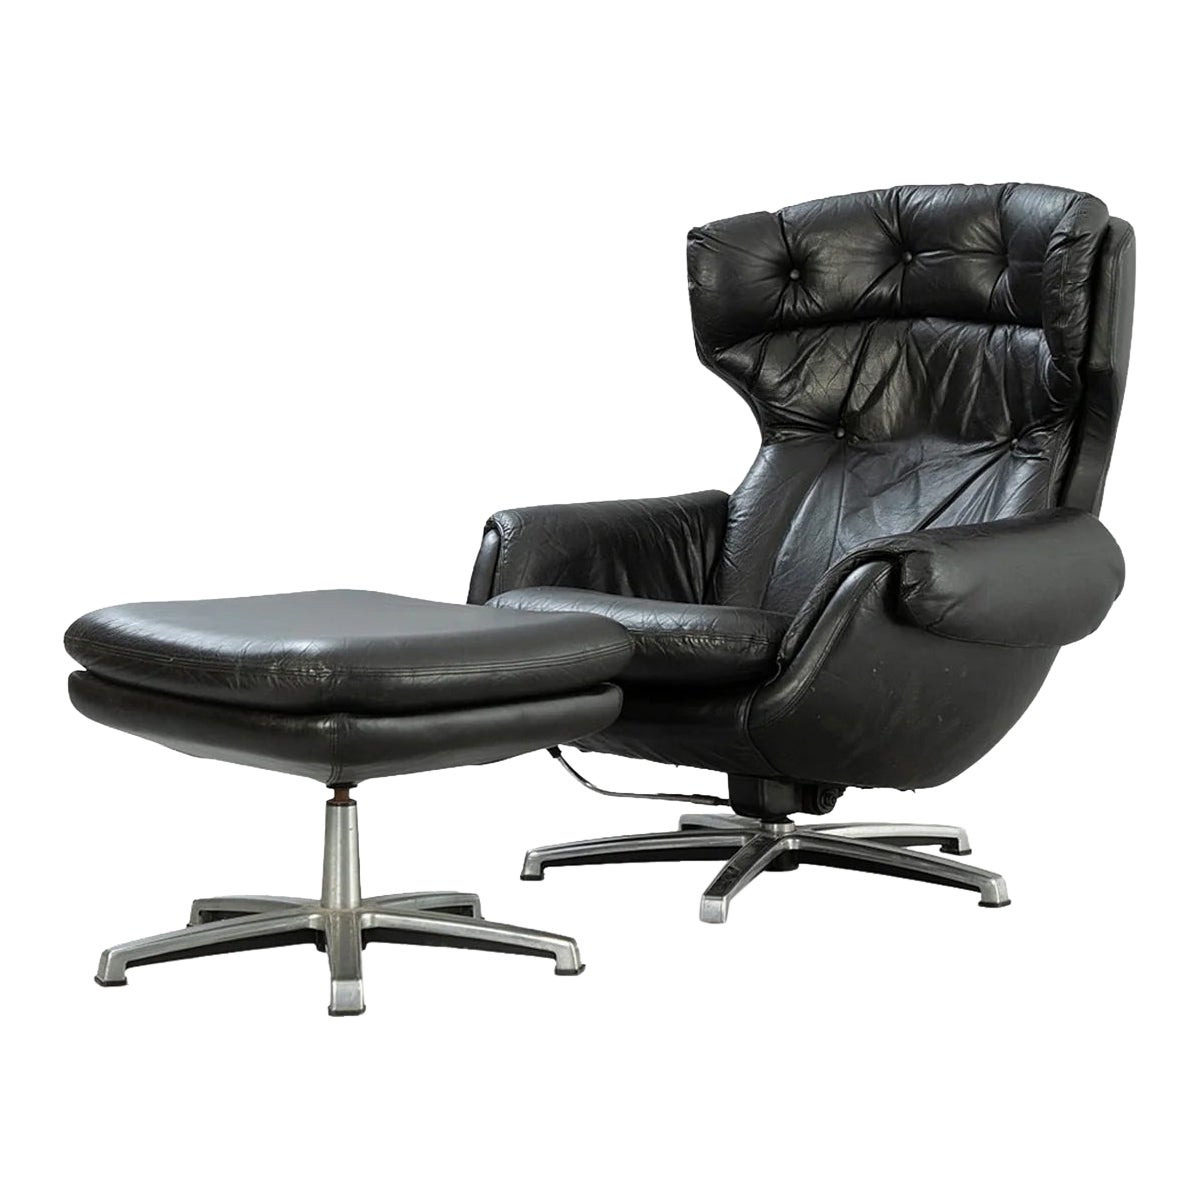 Reclining finnish lounge chair + ottoman in black leather